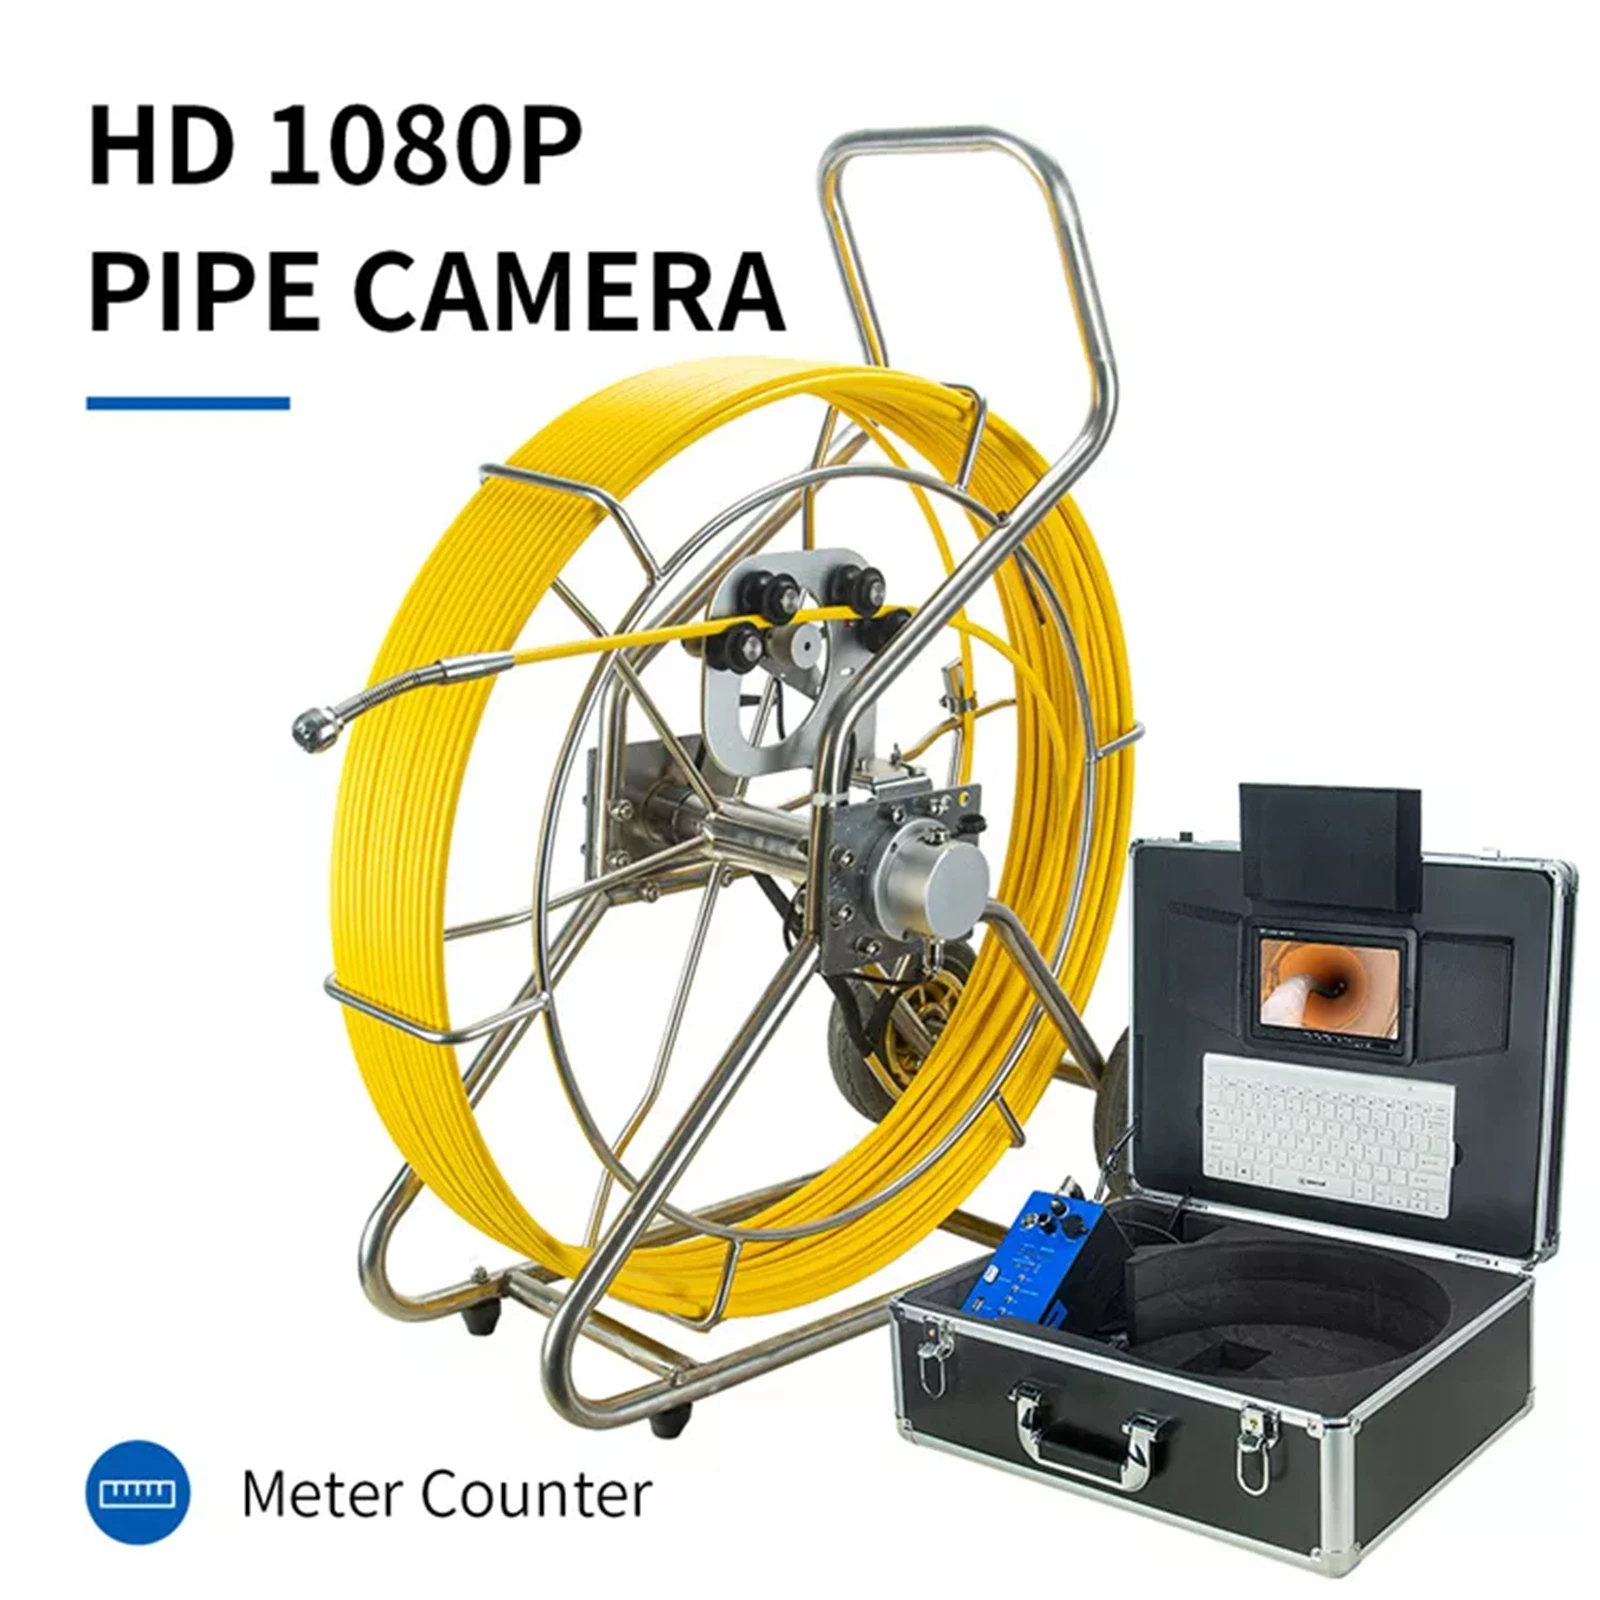 Pipe Inspection Camera, SYANSPAN 9 inch Sewer Endoscope Camer Meter Counter Vedio and Redio and 32X image enlarge and 9mm cable pipe inspection camera syanspan 9 inch monitor sewer industrial endoscope video audio 8x image enlarge 20 50 100m